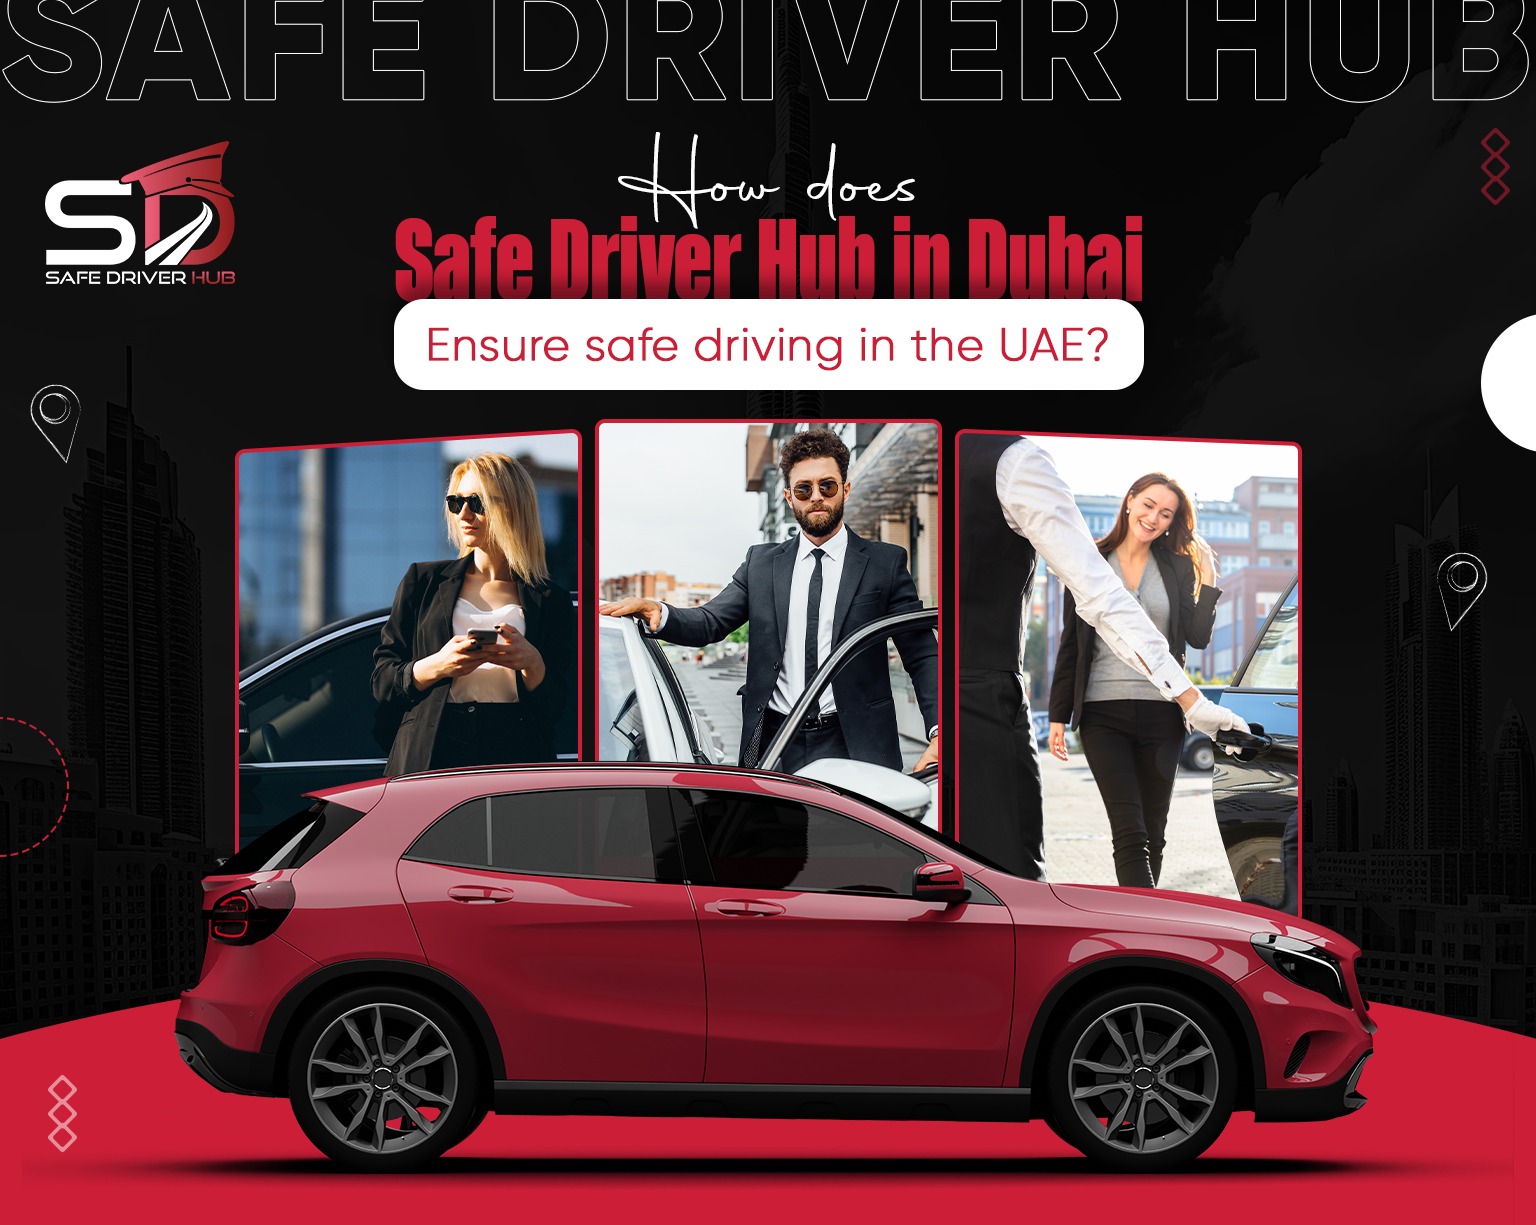 How-does-SafeDriver-Hub-in-Dubai-ensure-safe-driving-in-the-UAE?